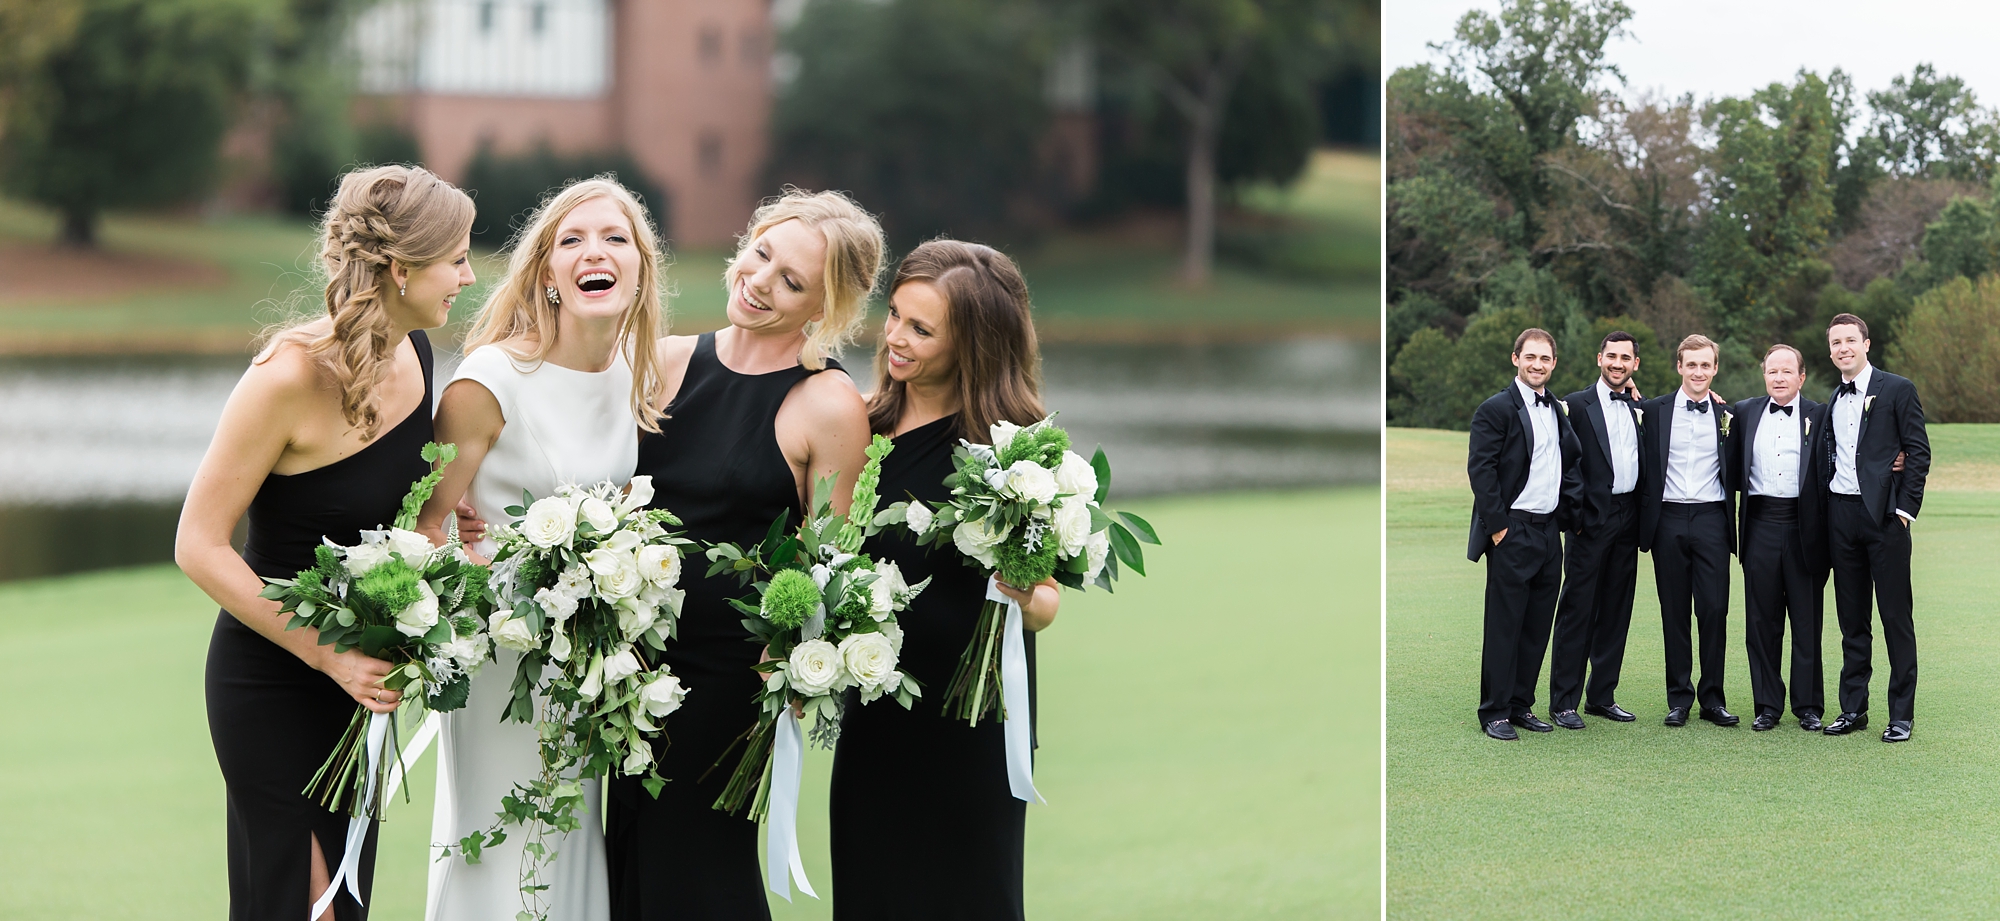 Black and White Bridal Party at East Lake Golf Club by Top Atlanta Wedding Photographer Leigh Wolfe Photography